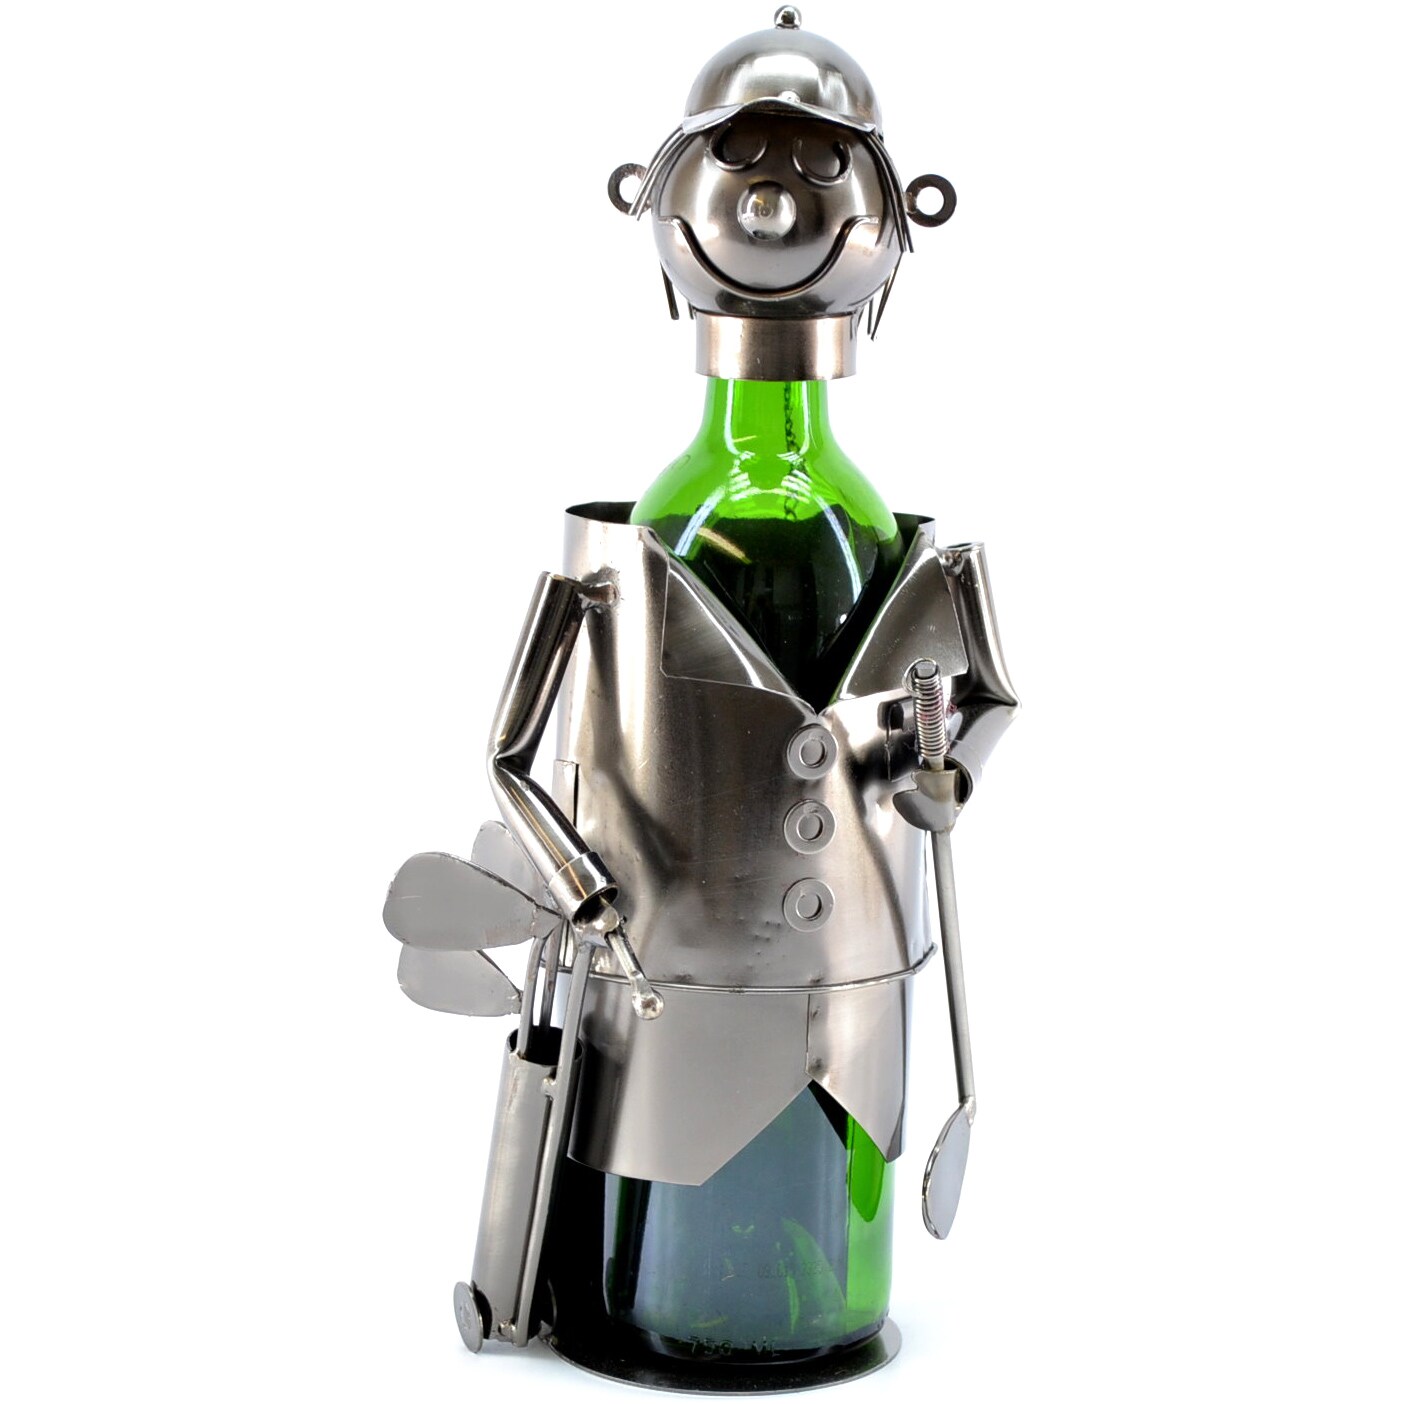 Wine Bottle Holder Wine Rack Golfer with Golf Clubs Bar Decor in Silver Kitchen Gift - image 2 of 2